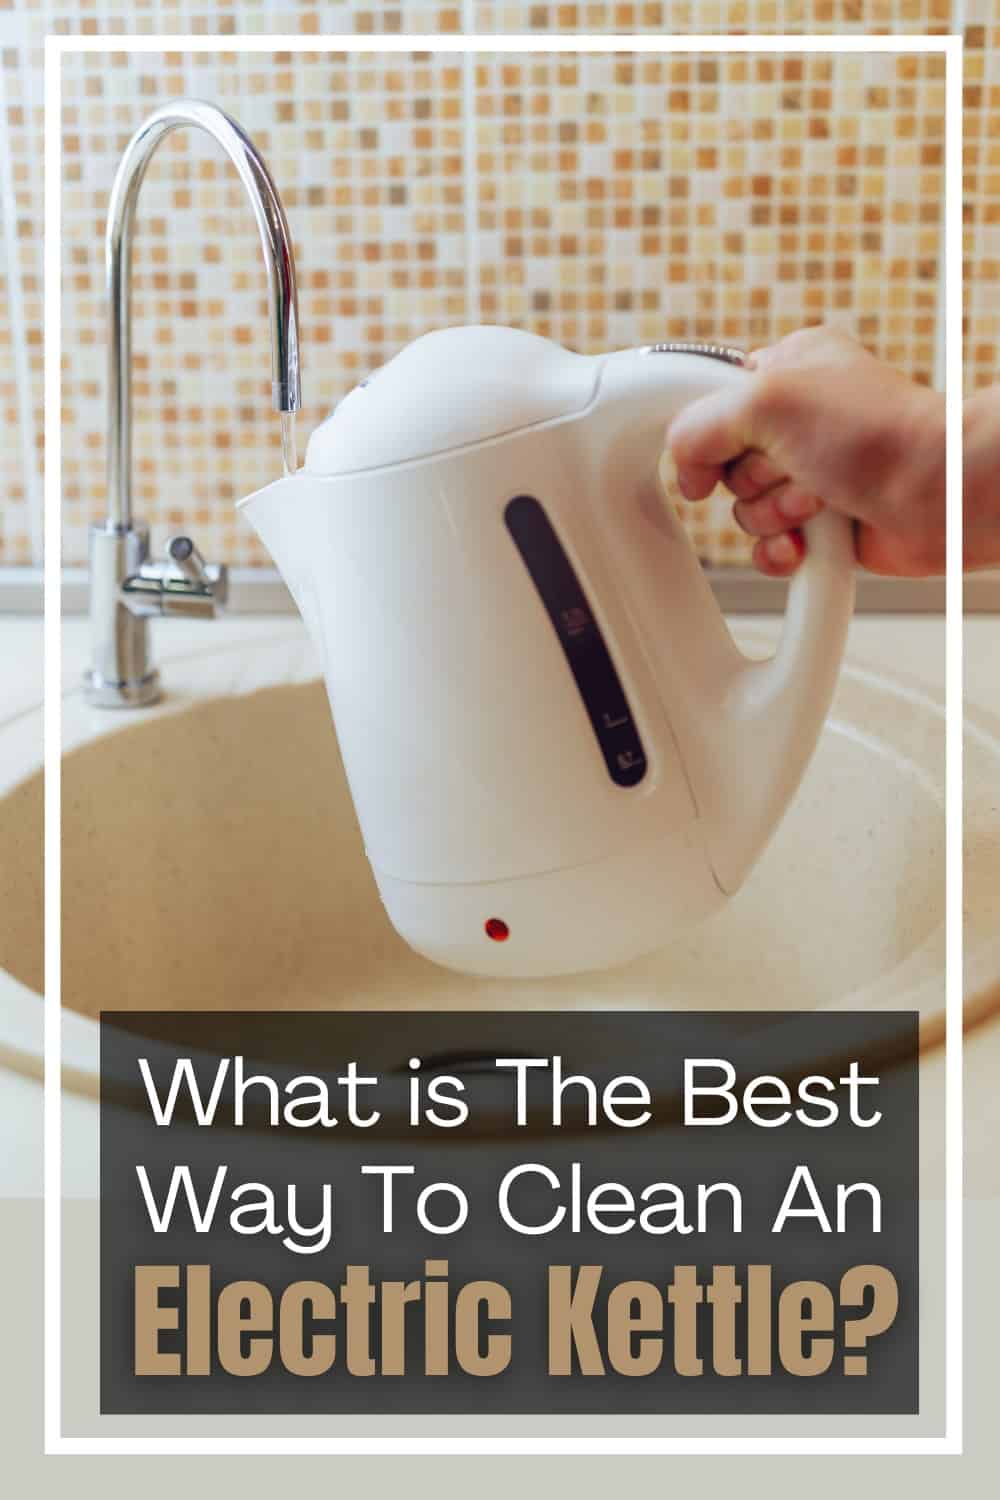 Use lemon, and baking soda to clean inside an electric kettle